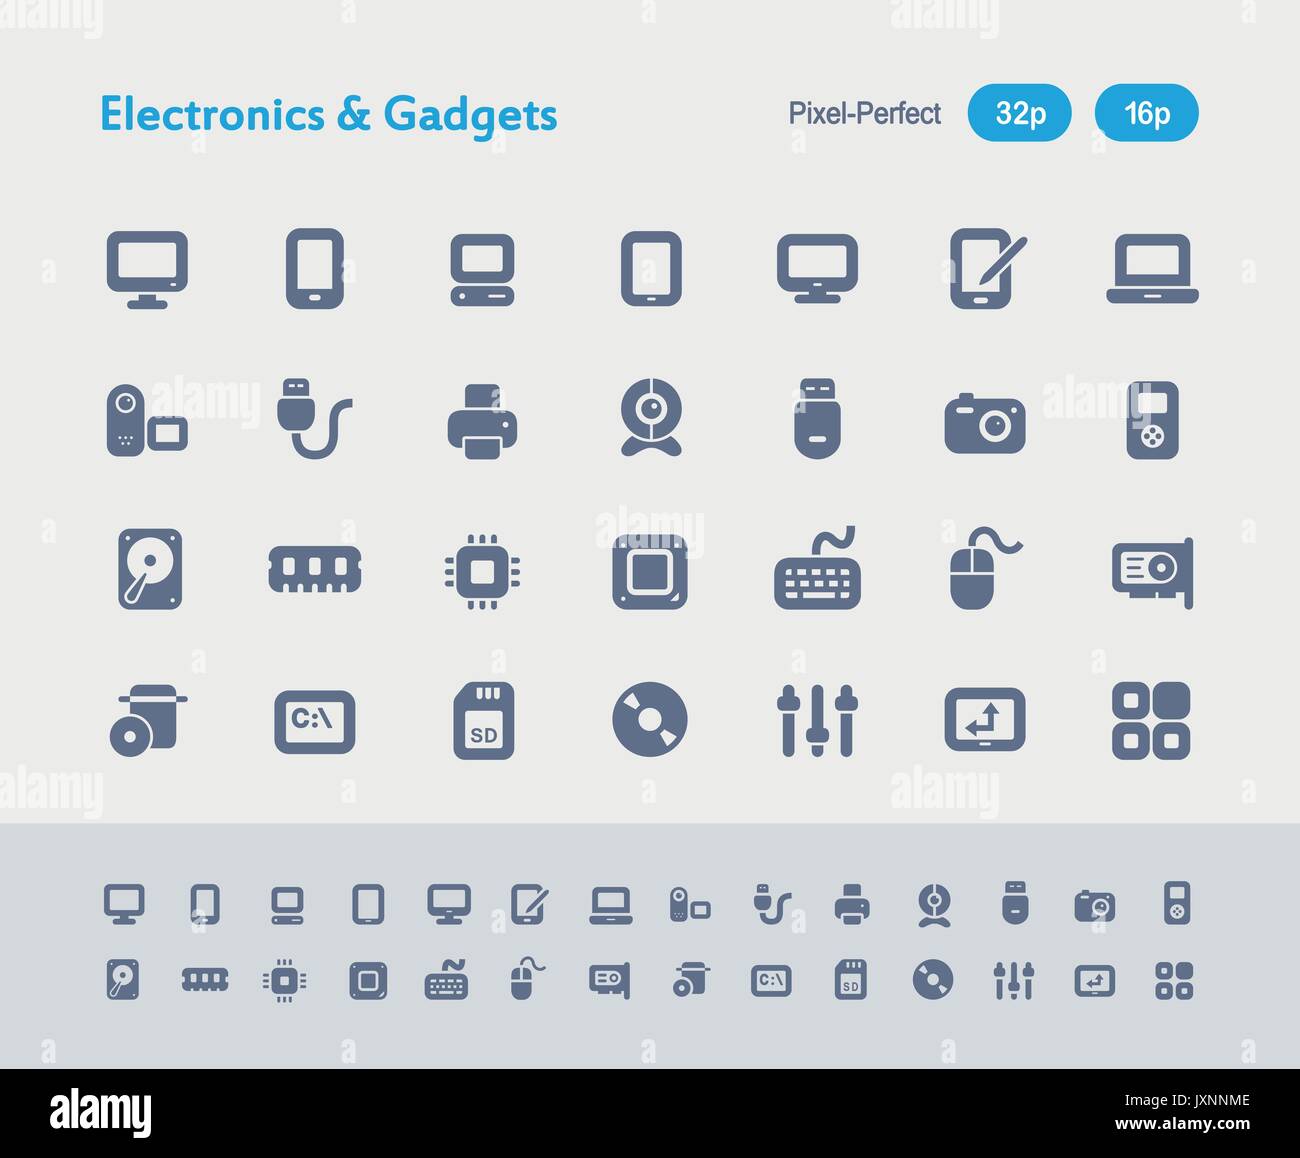 A set of 28 professional, pixel-perfect vector icons designed on a 32x32 pixel grid and redesigned on a 16x16 pixel grid for very small sizes. Stock Vector